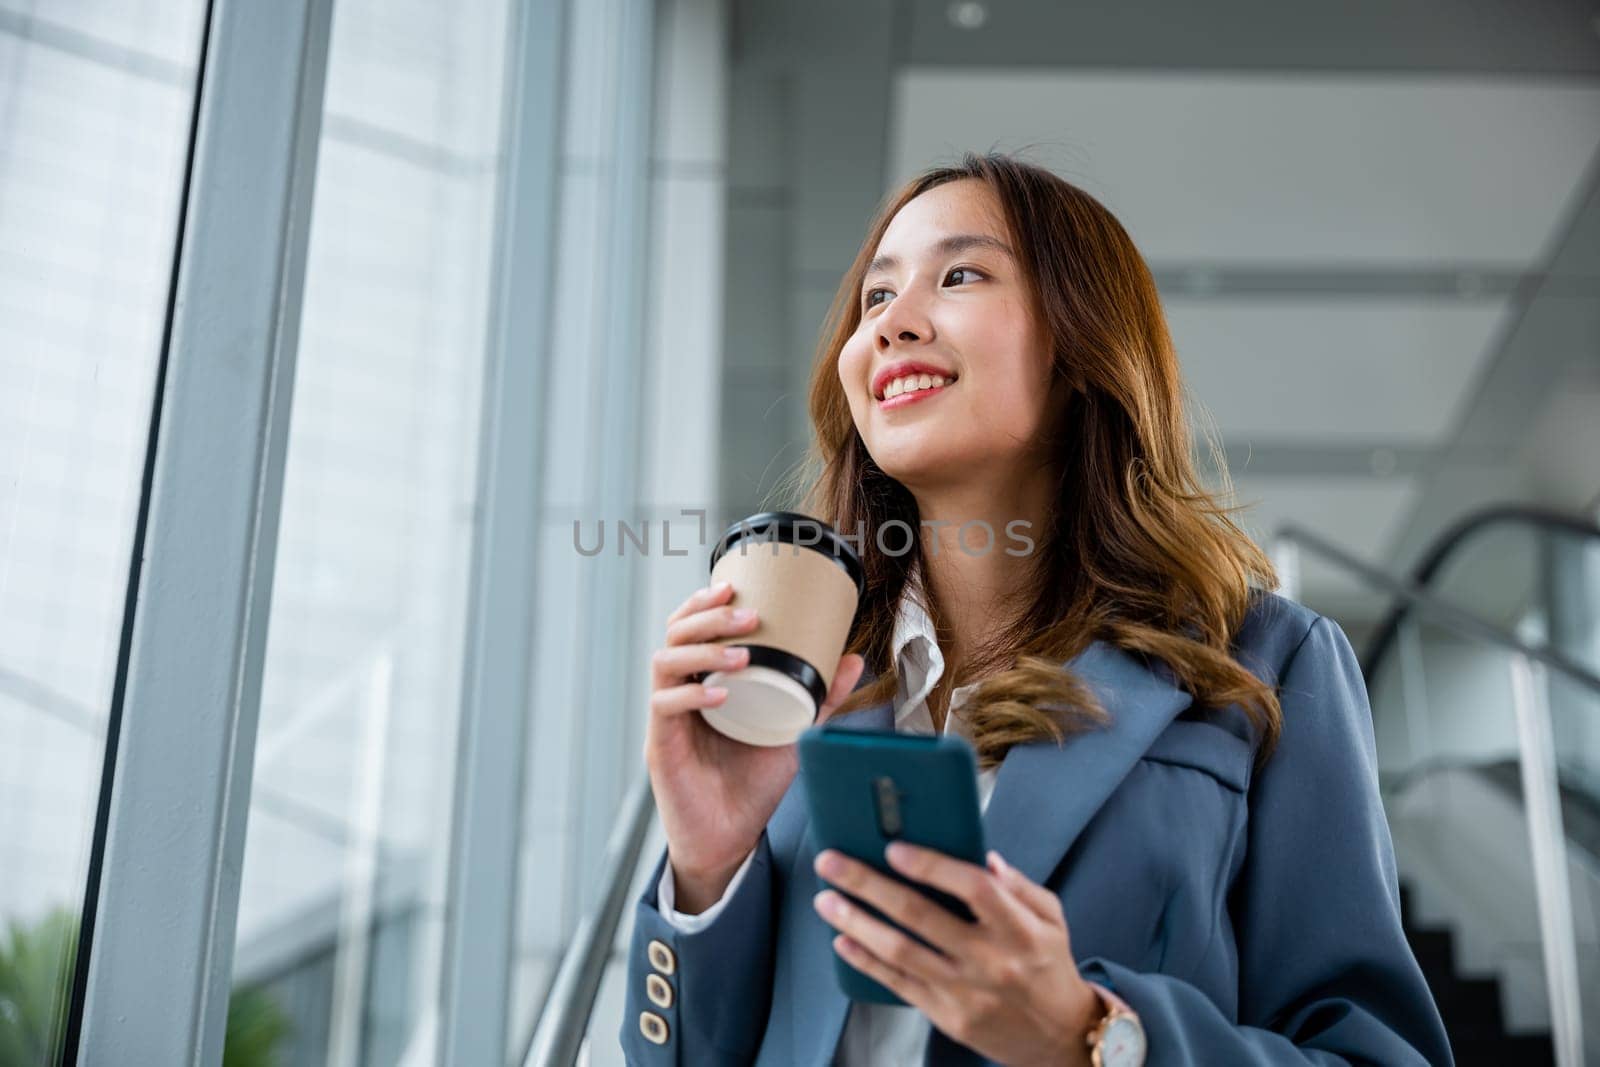 Young Asian businesswoman wearing blue shirt holding coffee cup and her smartphone. She smiling and looking out of the window and elevator blur background in the office.